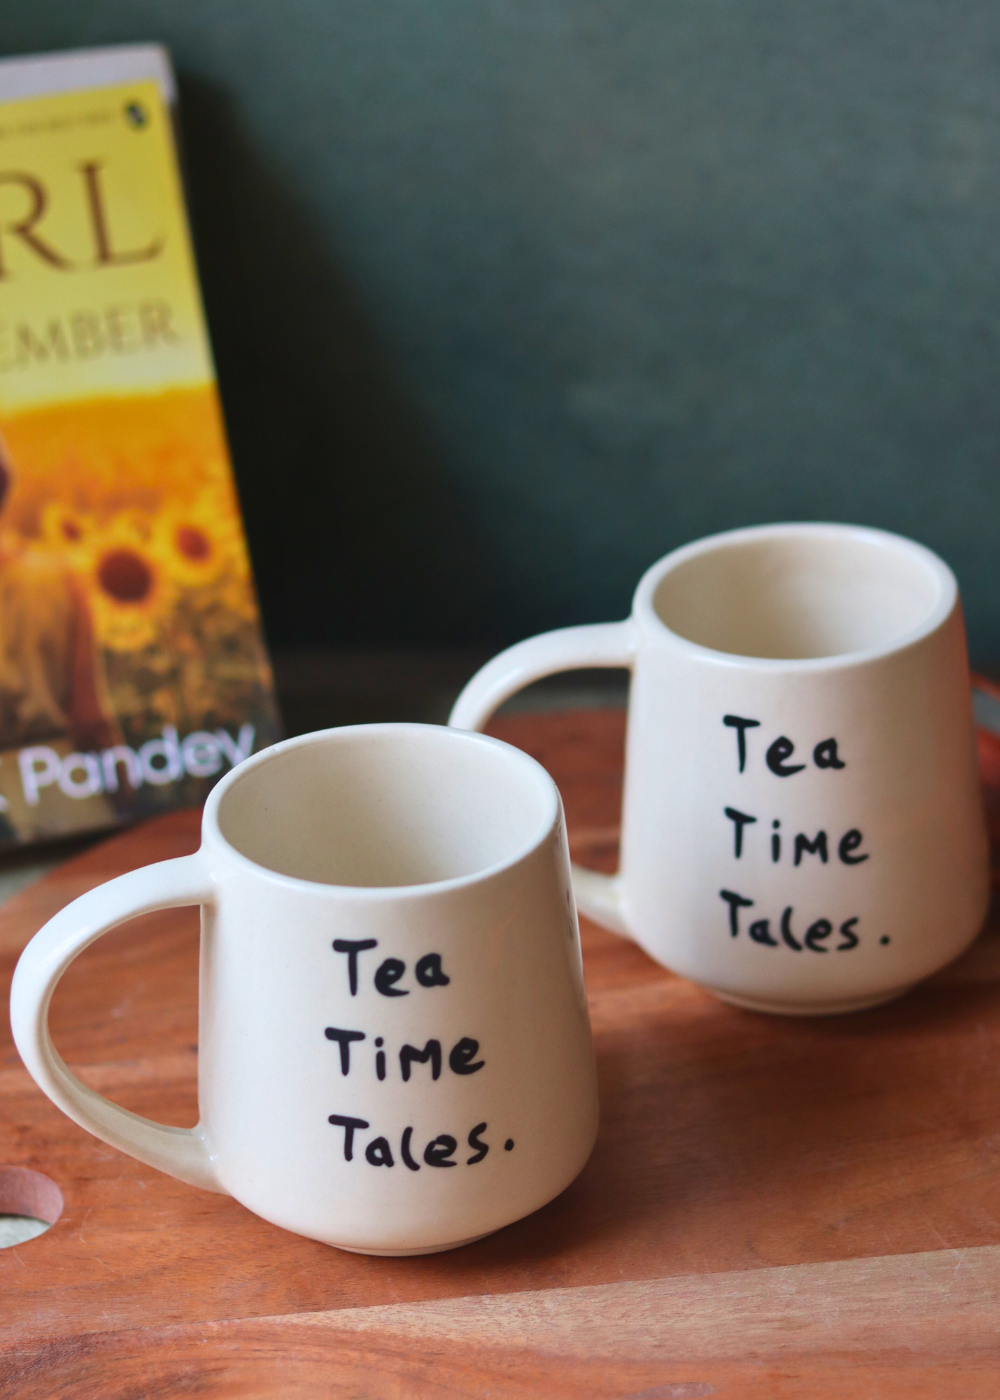 Ceramic coffee mugs quoted tea time tales